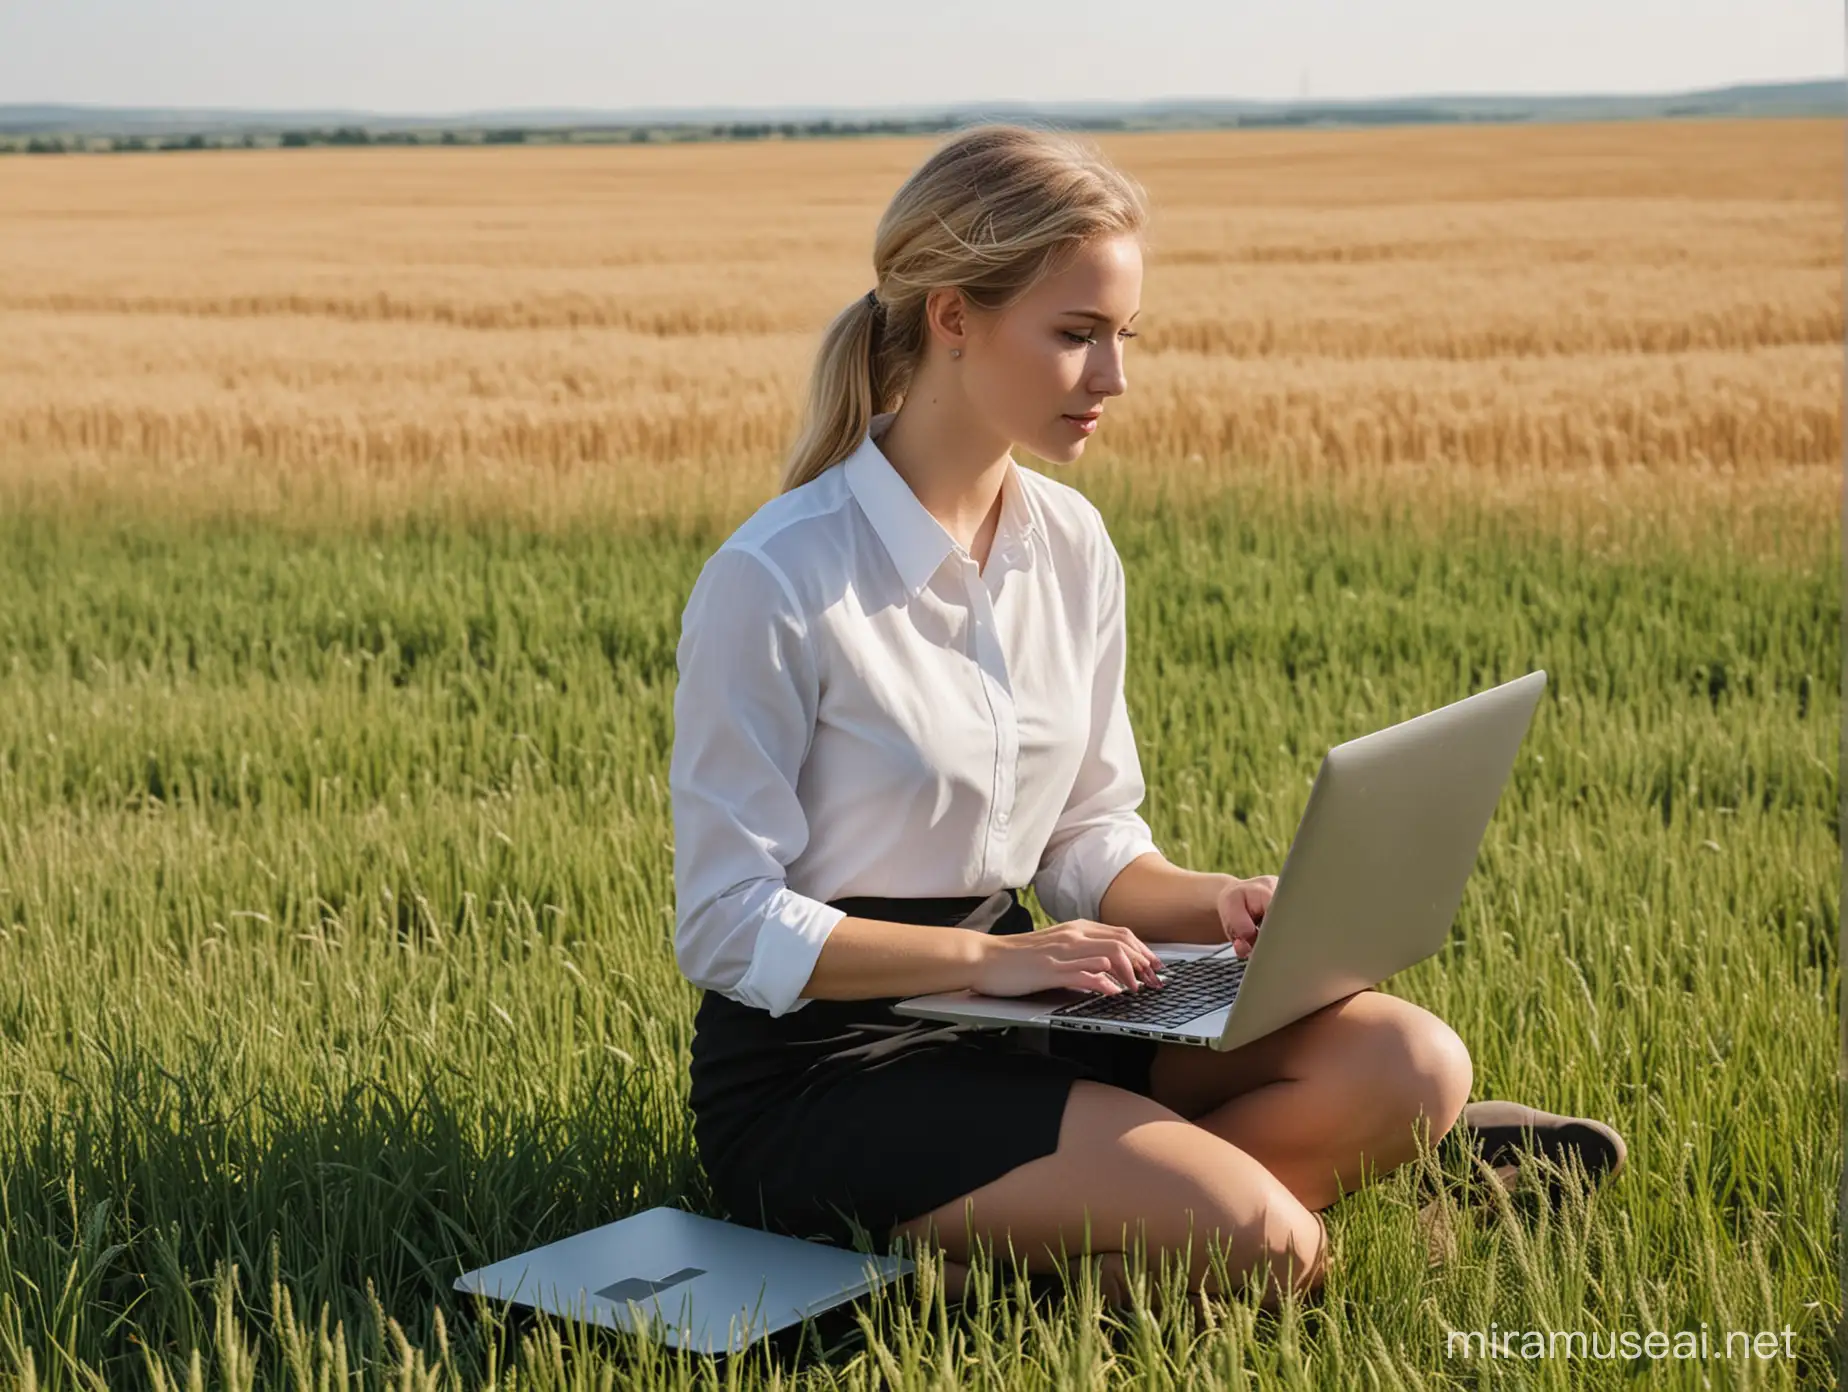 Blonde Business Consultant Evaluating Crops in European Wheat Fields